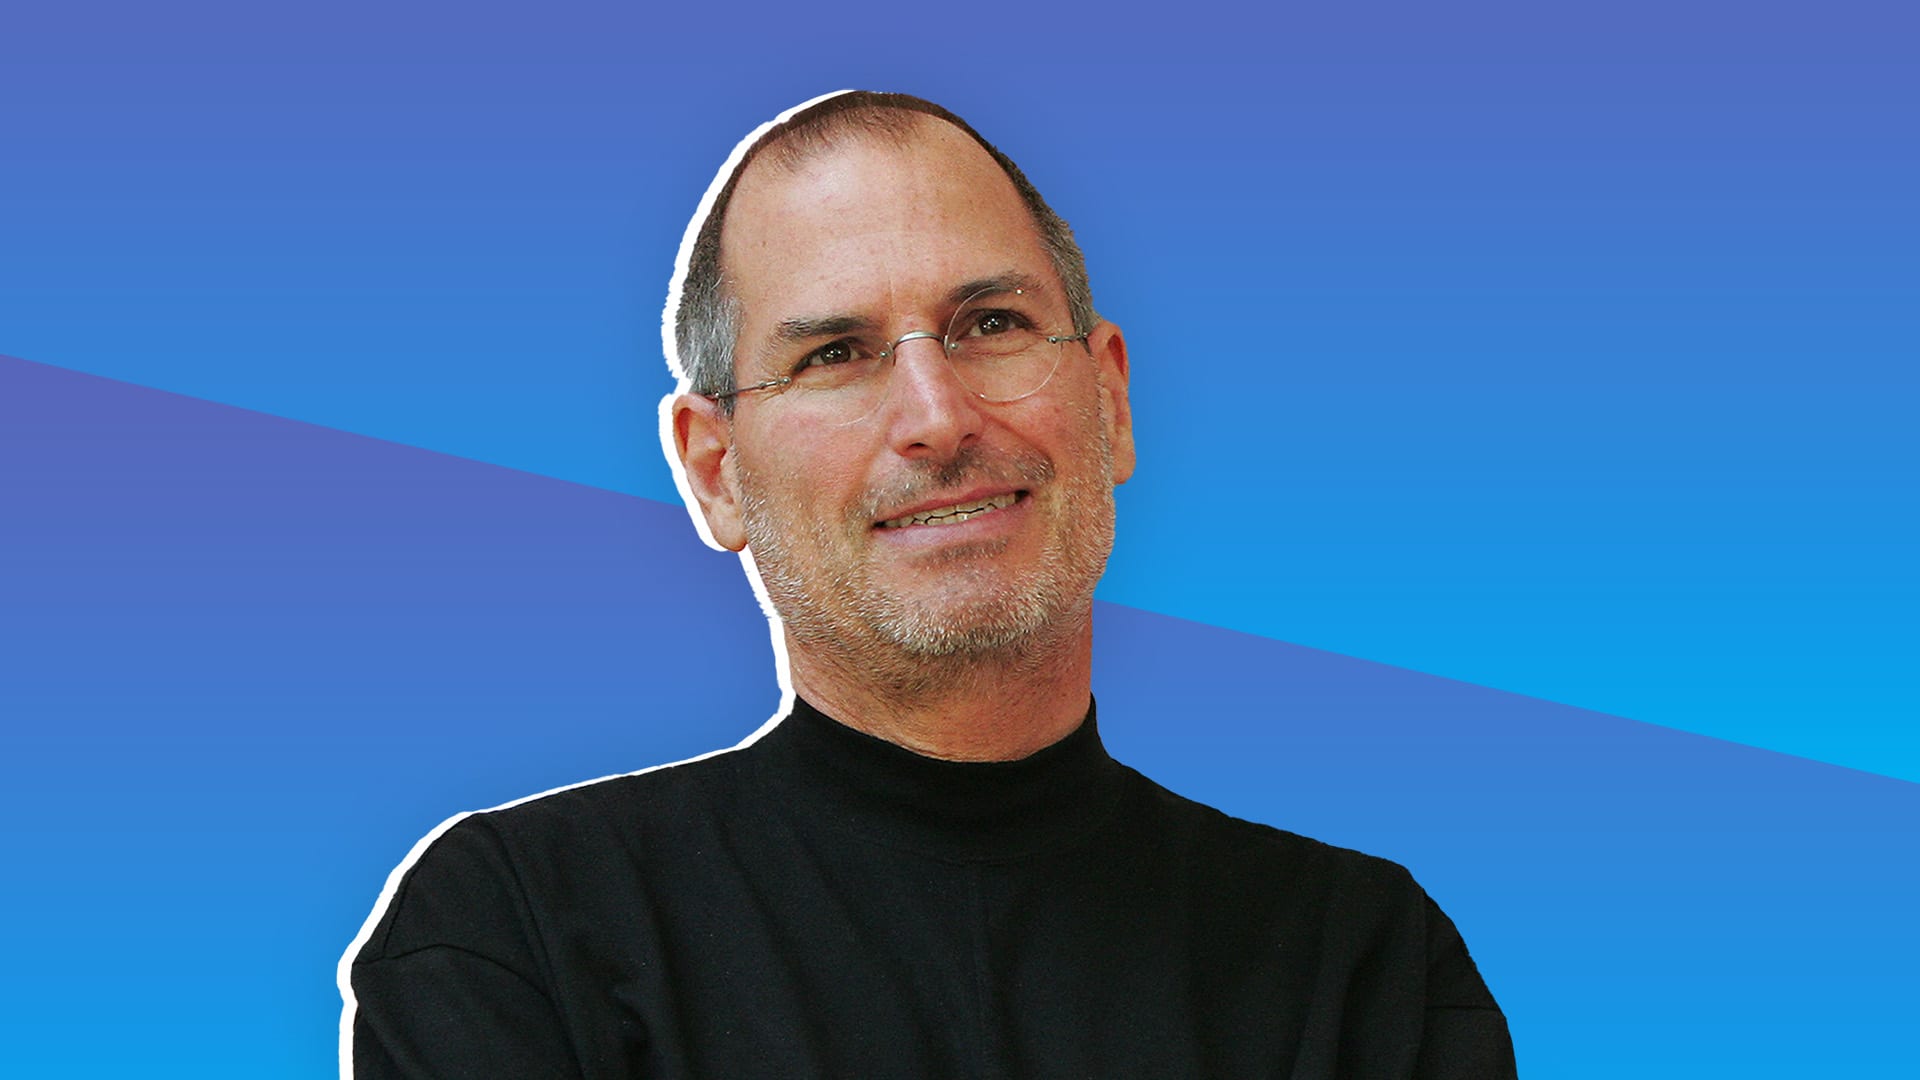 Follow Steve Jobs's 5-Step Presentation Process to Wow Your Audience |  